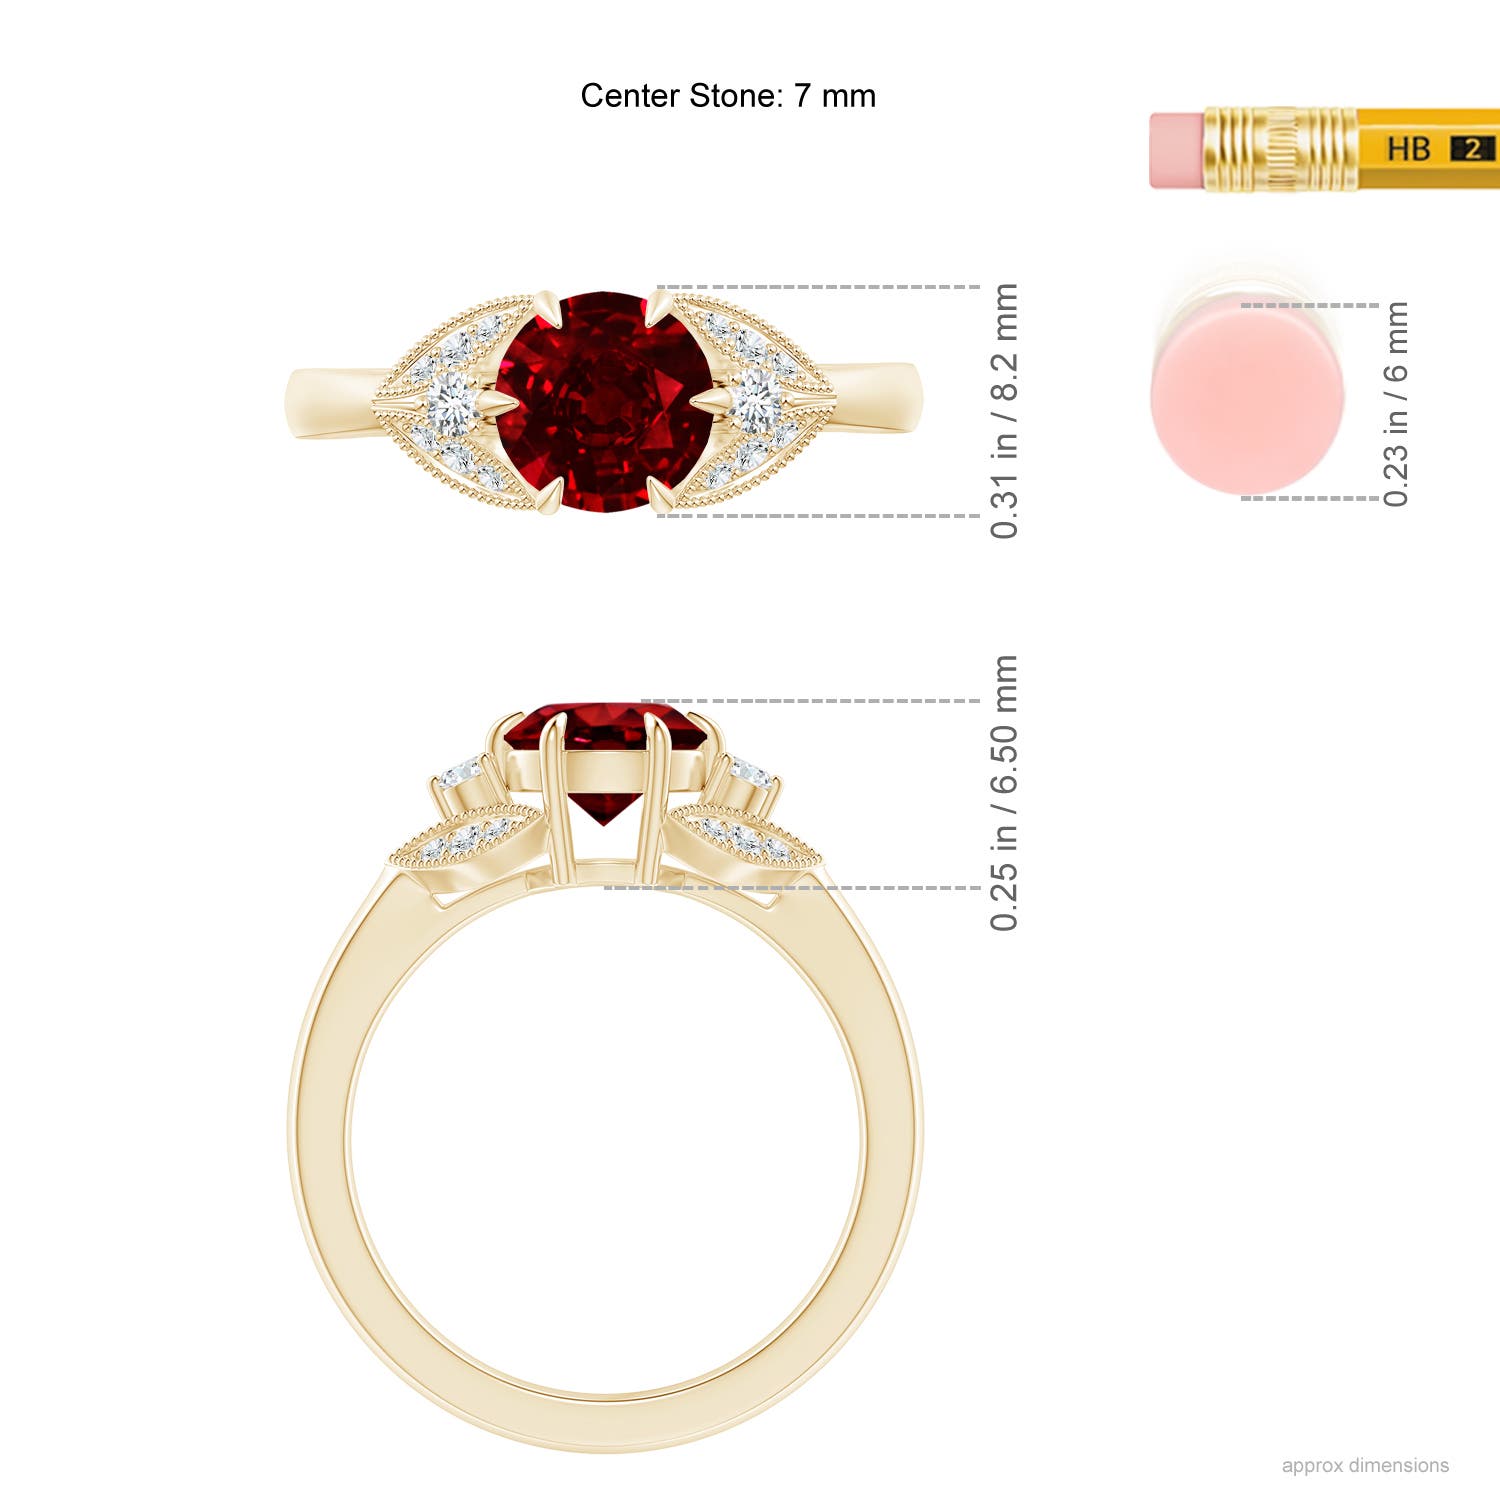 AAAA - Ruby / 1.64 CT / 14 KT Yellow Gold